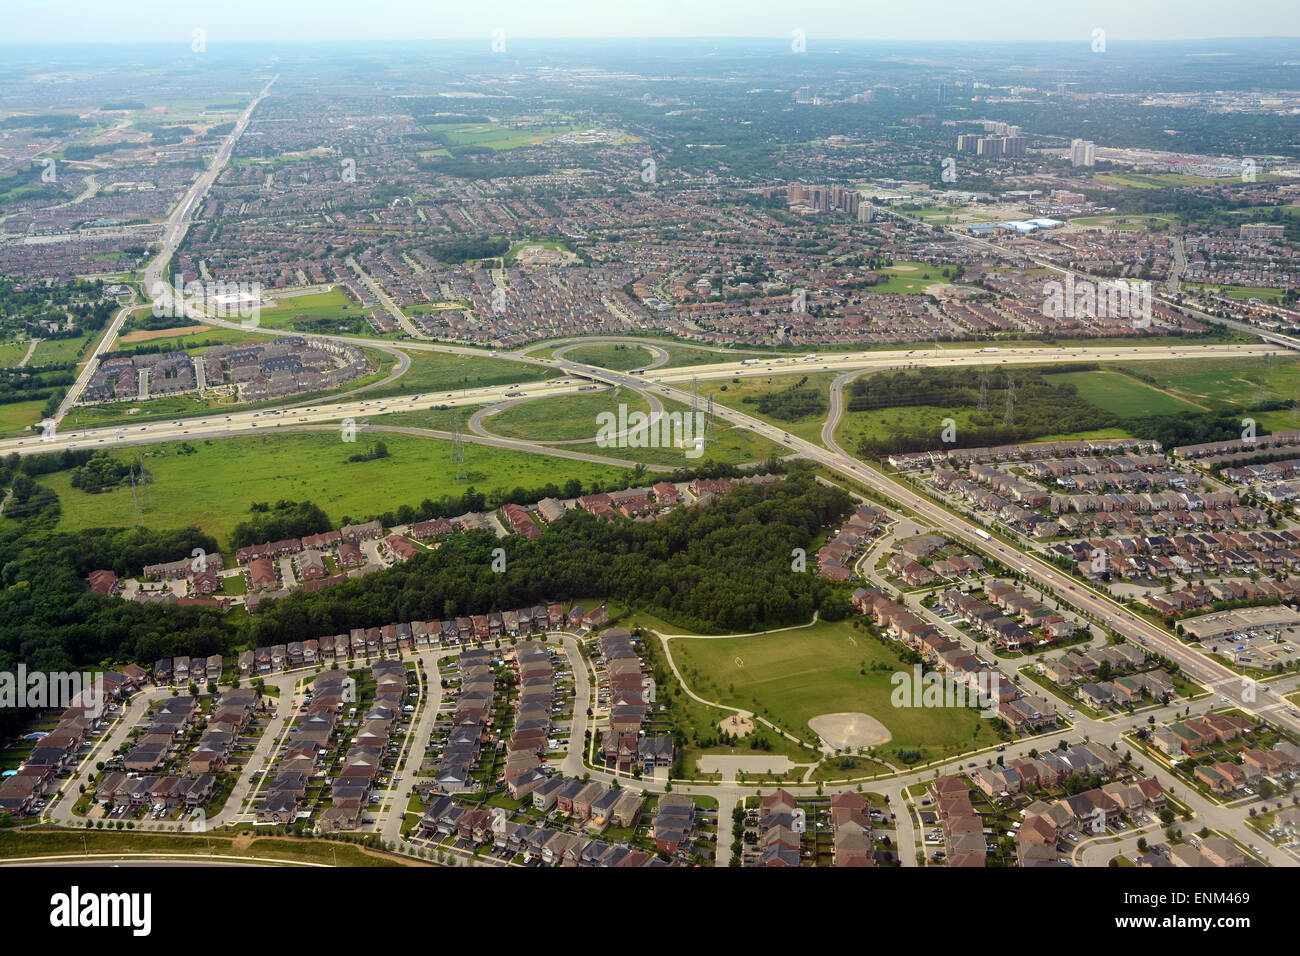 Suburbs and highways Aerial, Toronto, Canada Stock Photo